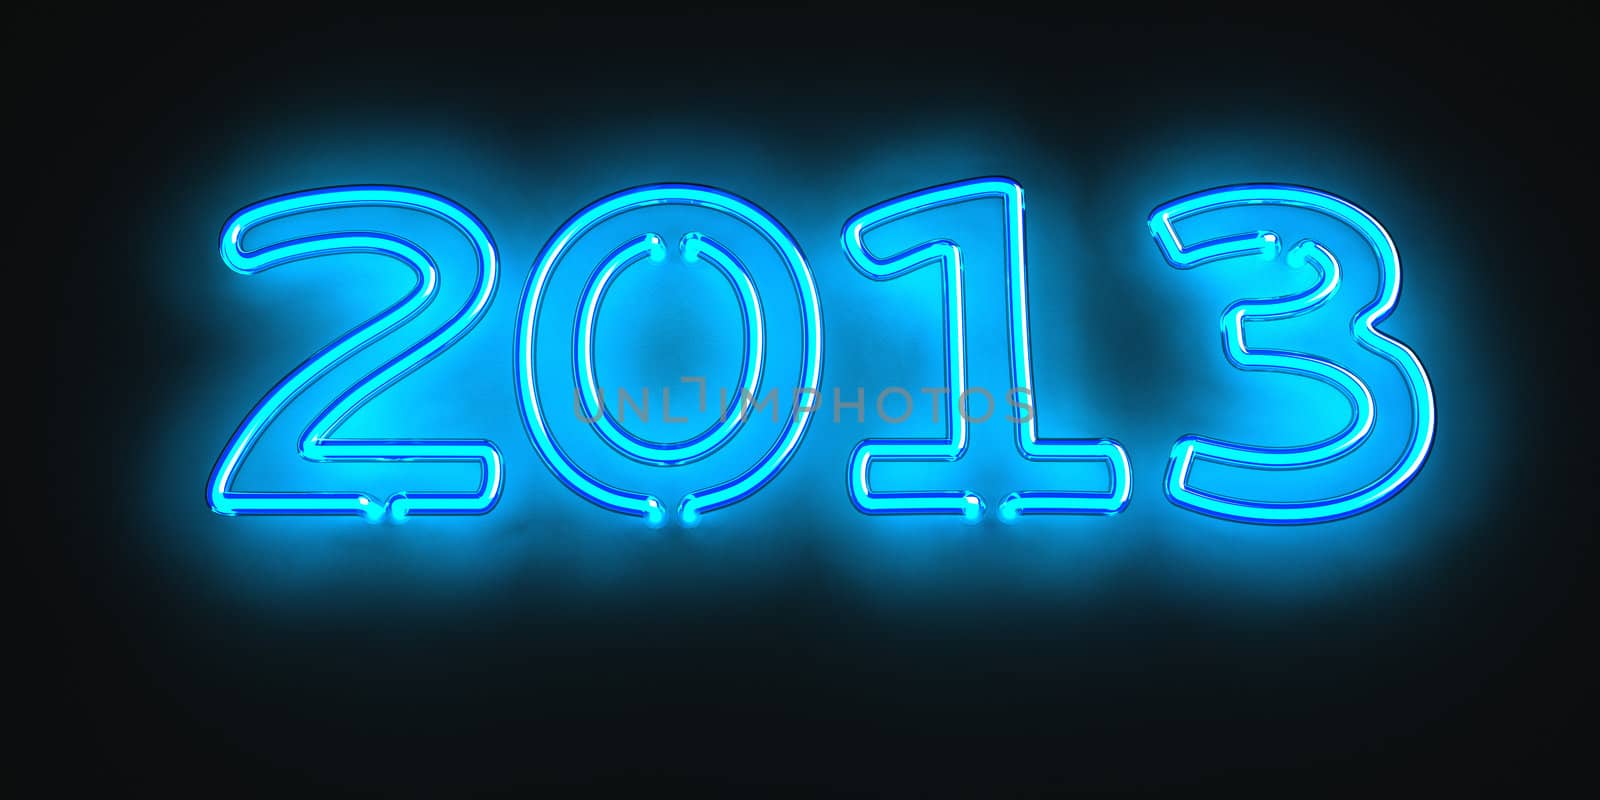 Neon 2013 by timbrk